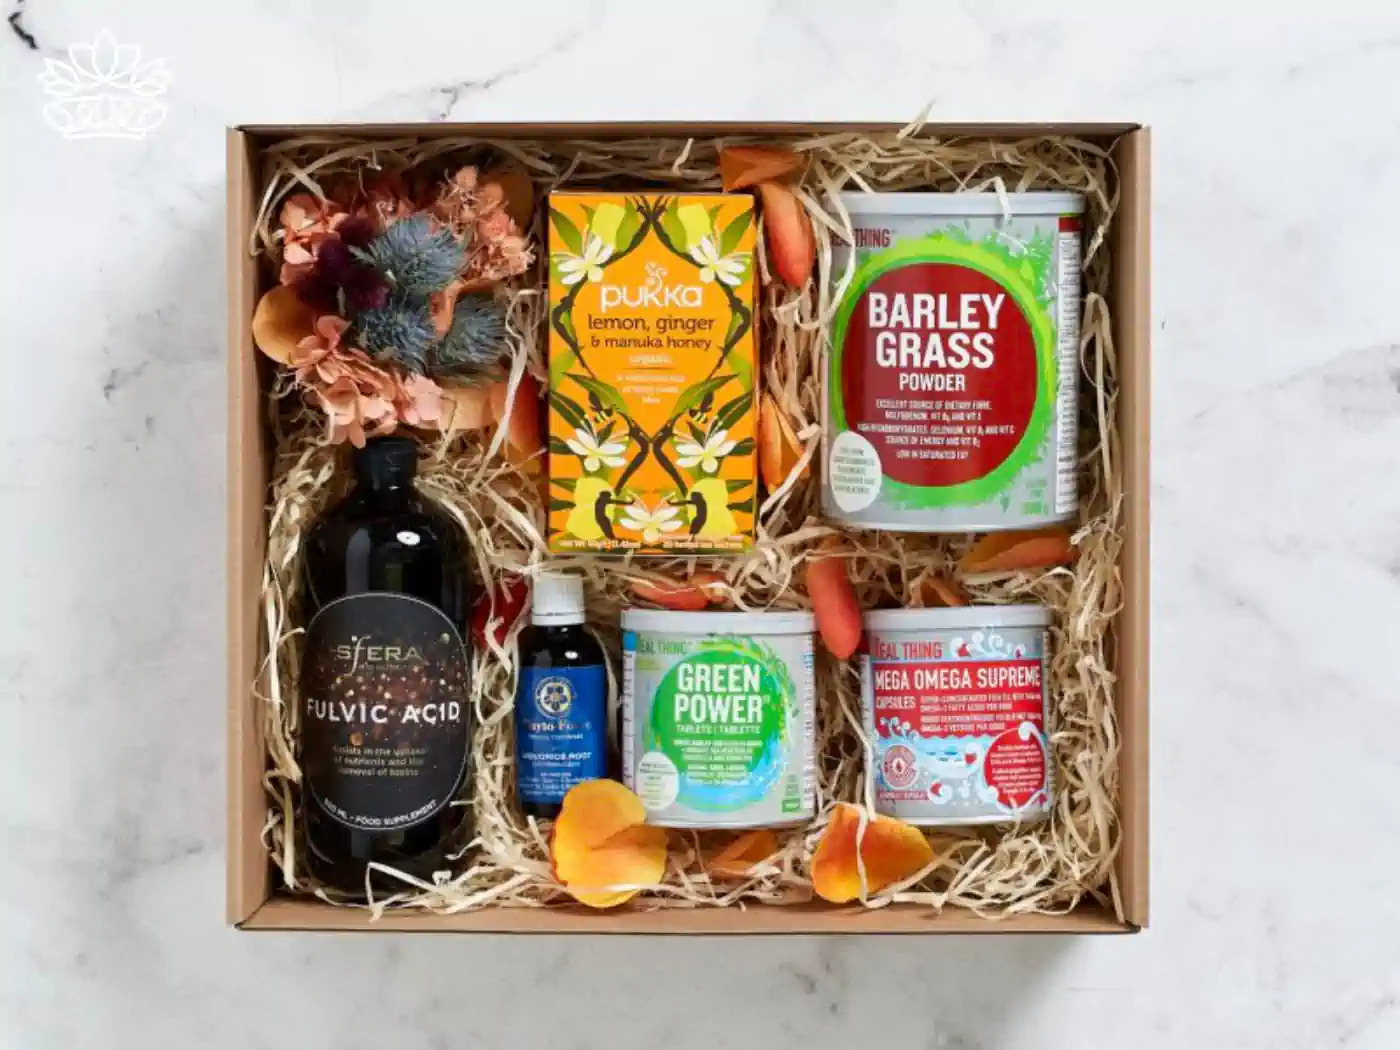 Wellness-focused get well gift box featuring a variety of health supplements including Fulvic Acid, Green Power mix, and Barley Grass powder, alongside soothing herbal teas, all presented in an eco-friendly box. Delivered with Heart. Fabulous Flowers and Gifts.